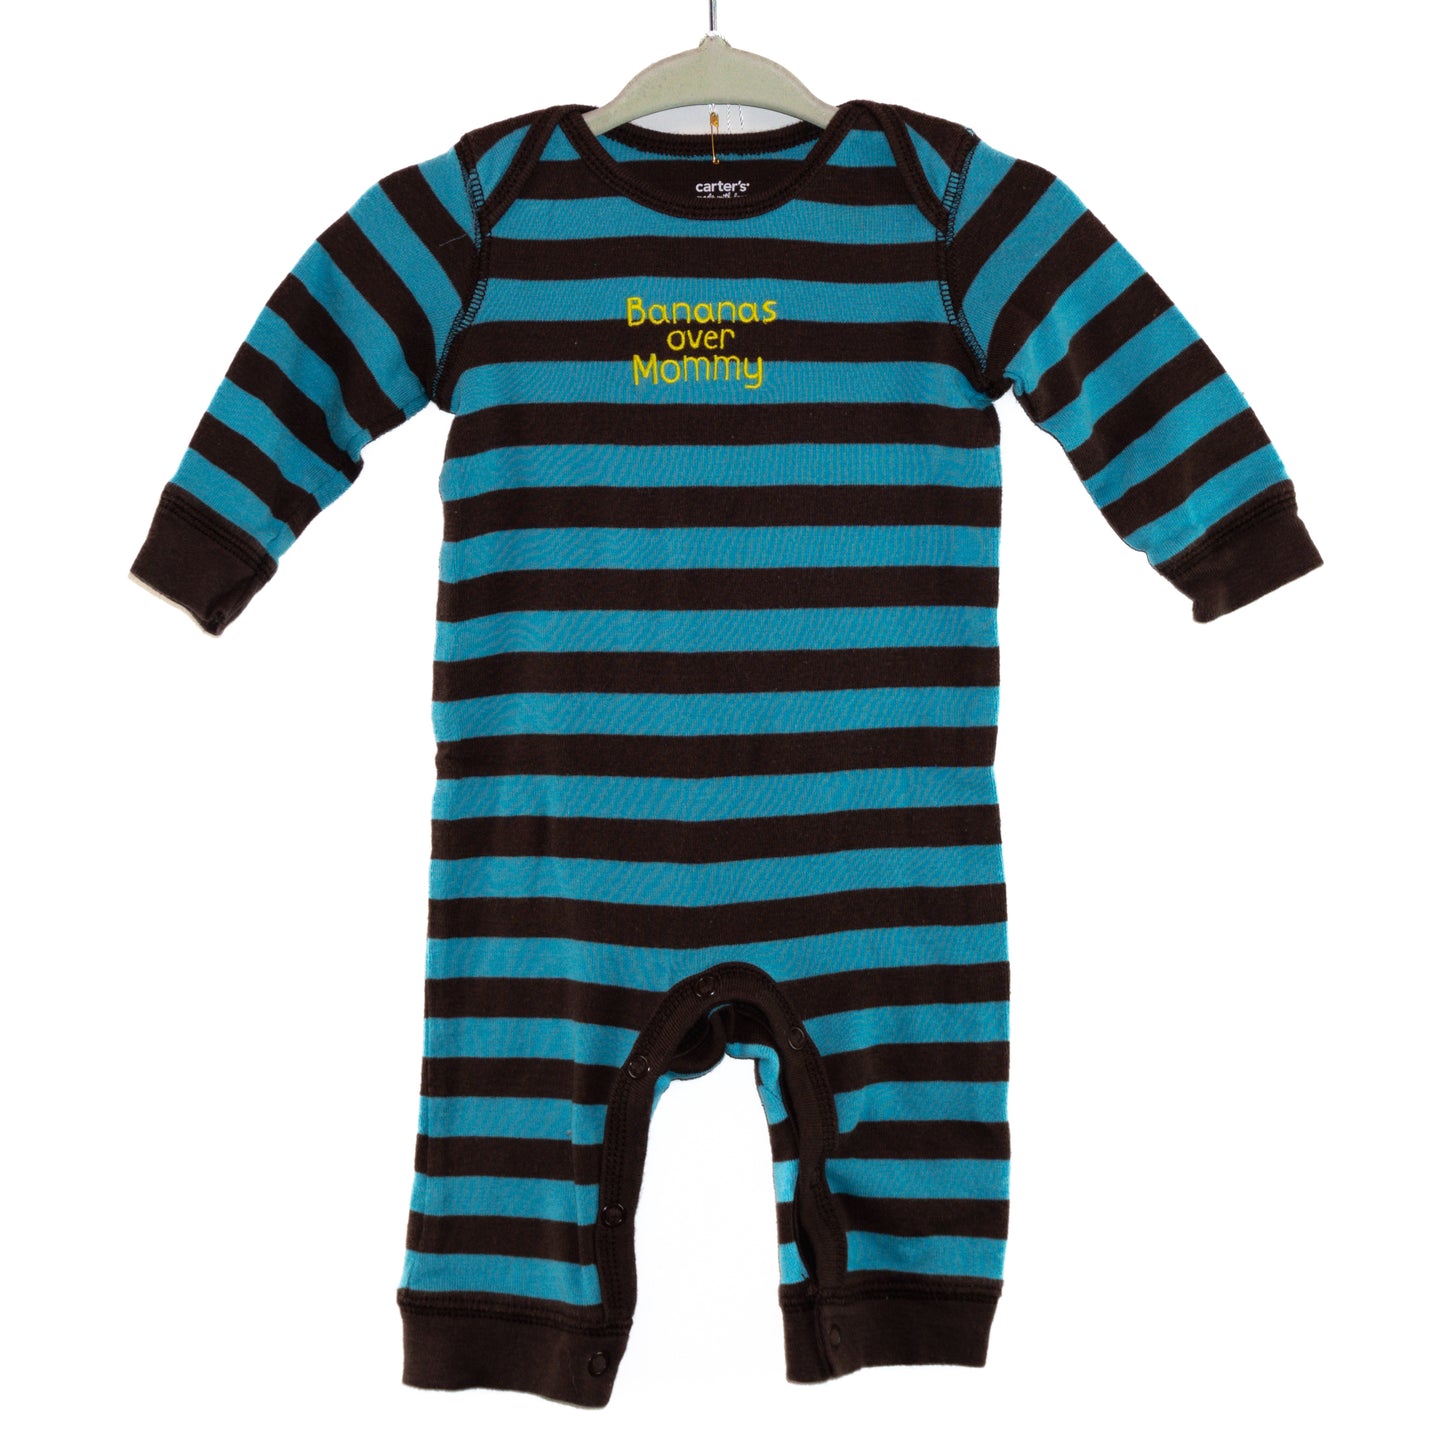 Bananas Over Mommy Footless Sleeper Size 3m